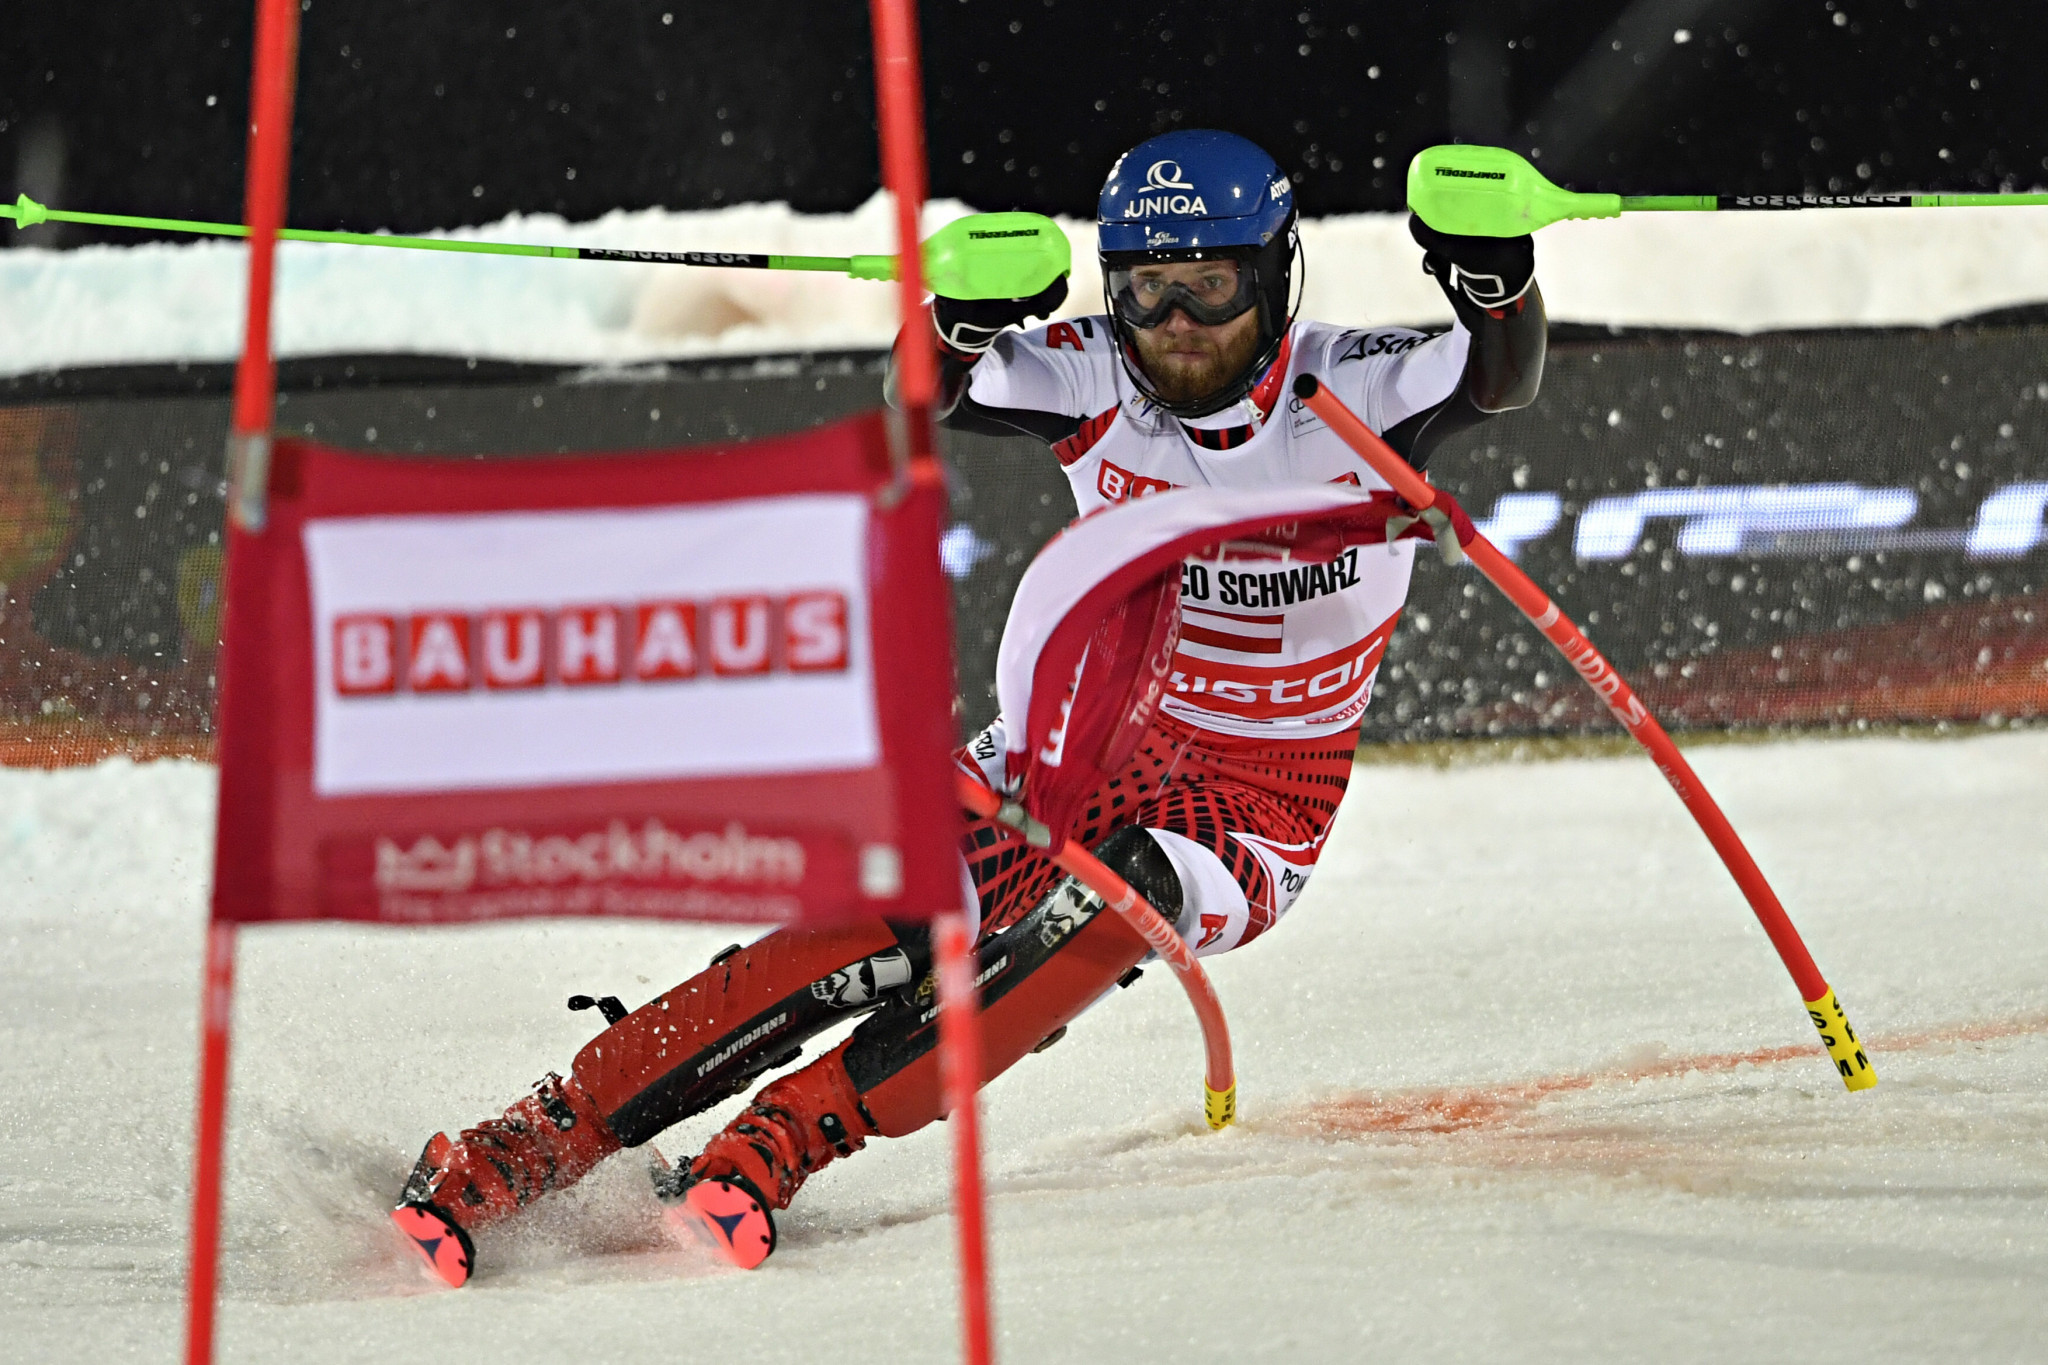 Austria's Marco Schwarz is the current leader in the Alpine combined category in the FIS World Cup Alpine Skiing ©Getty Images